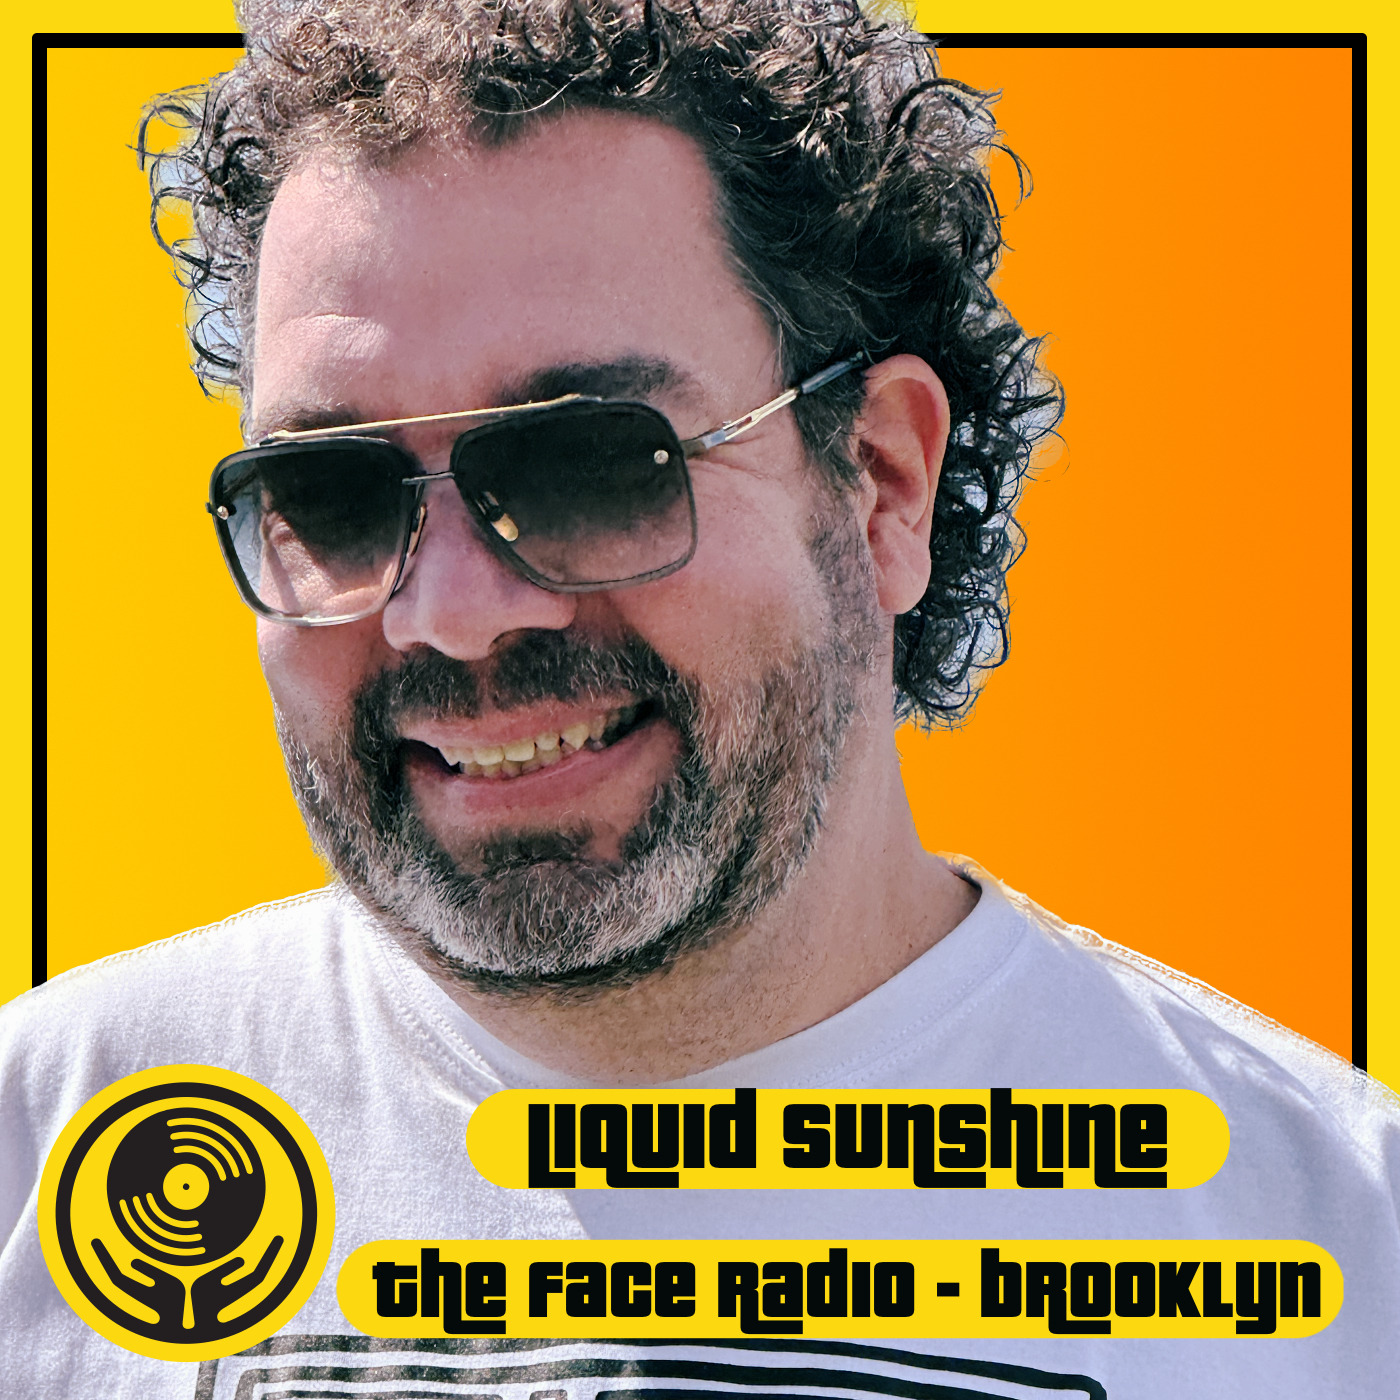 Summer Disco - We gonna Ring-Rang-A-Dong for a Holiday - Liquid Sunshine @ The Face Radio - Show#161